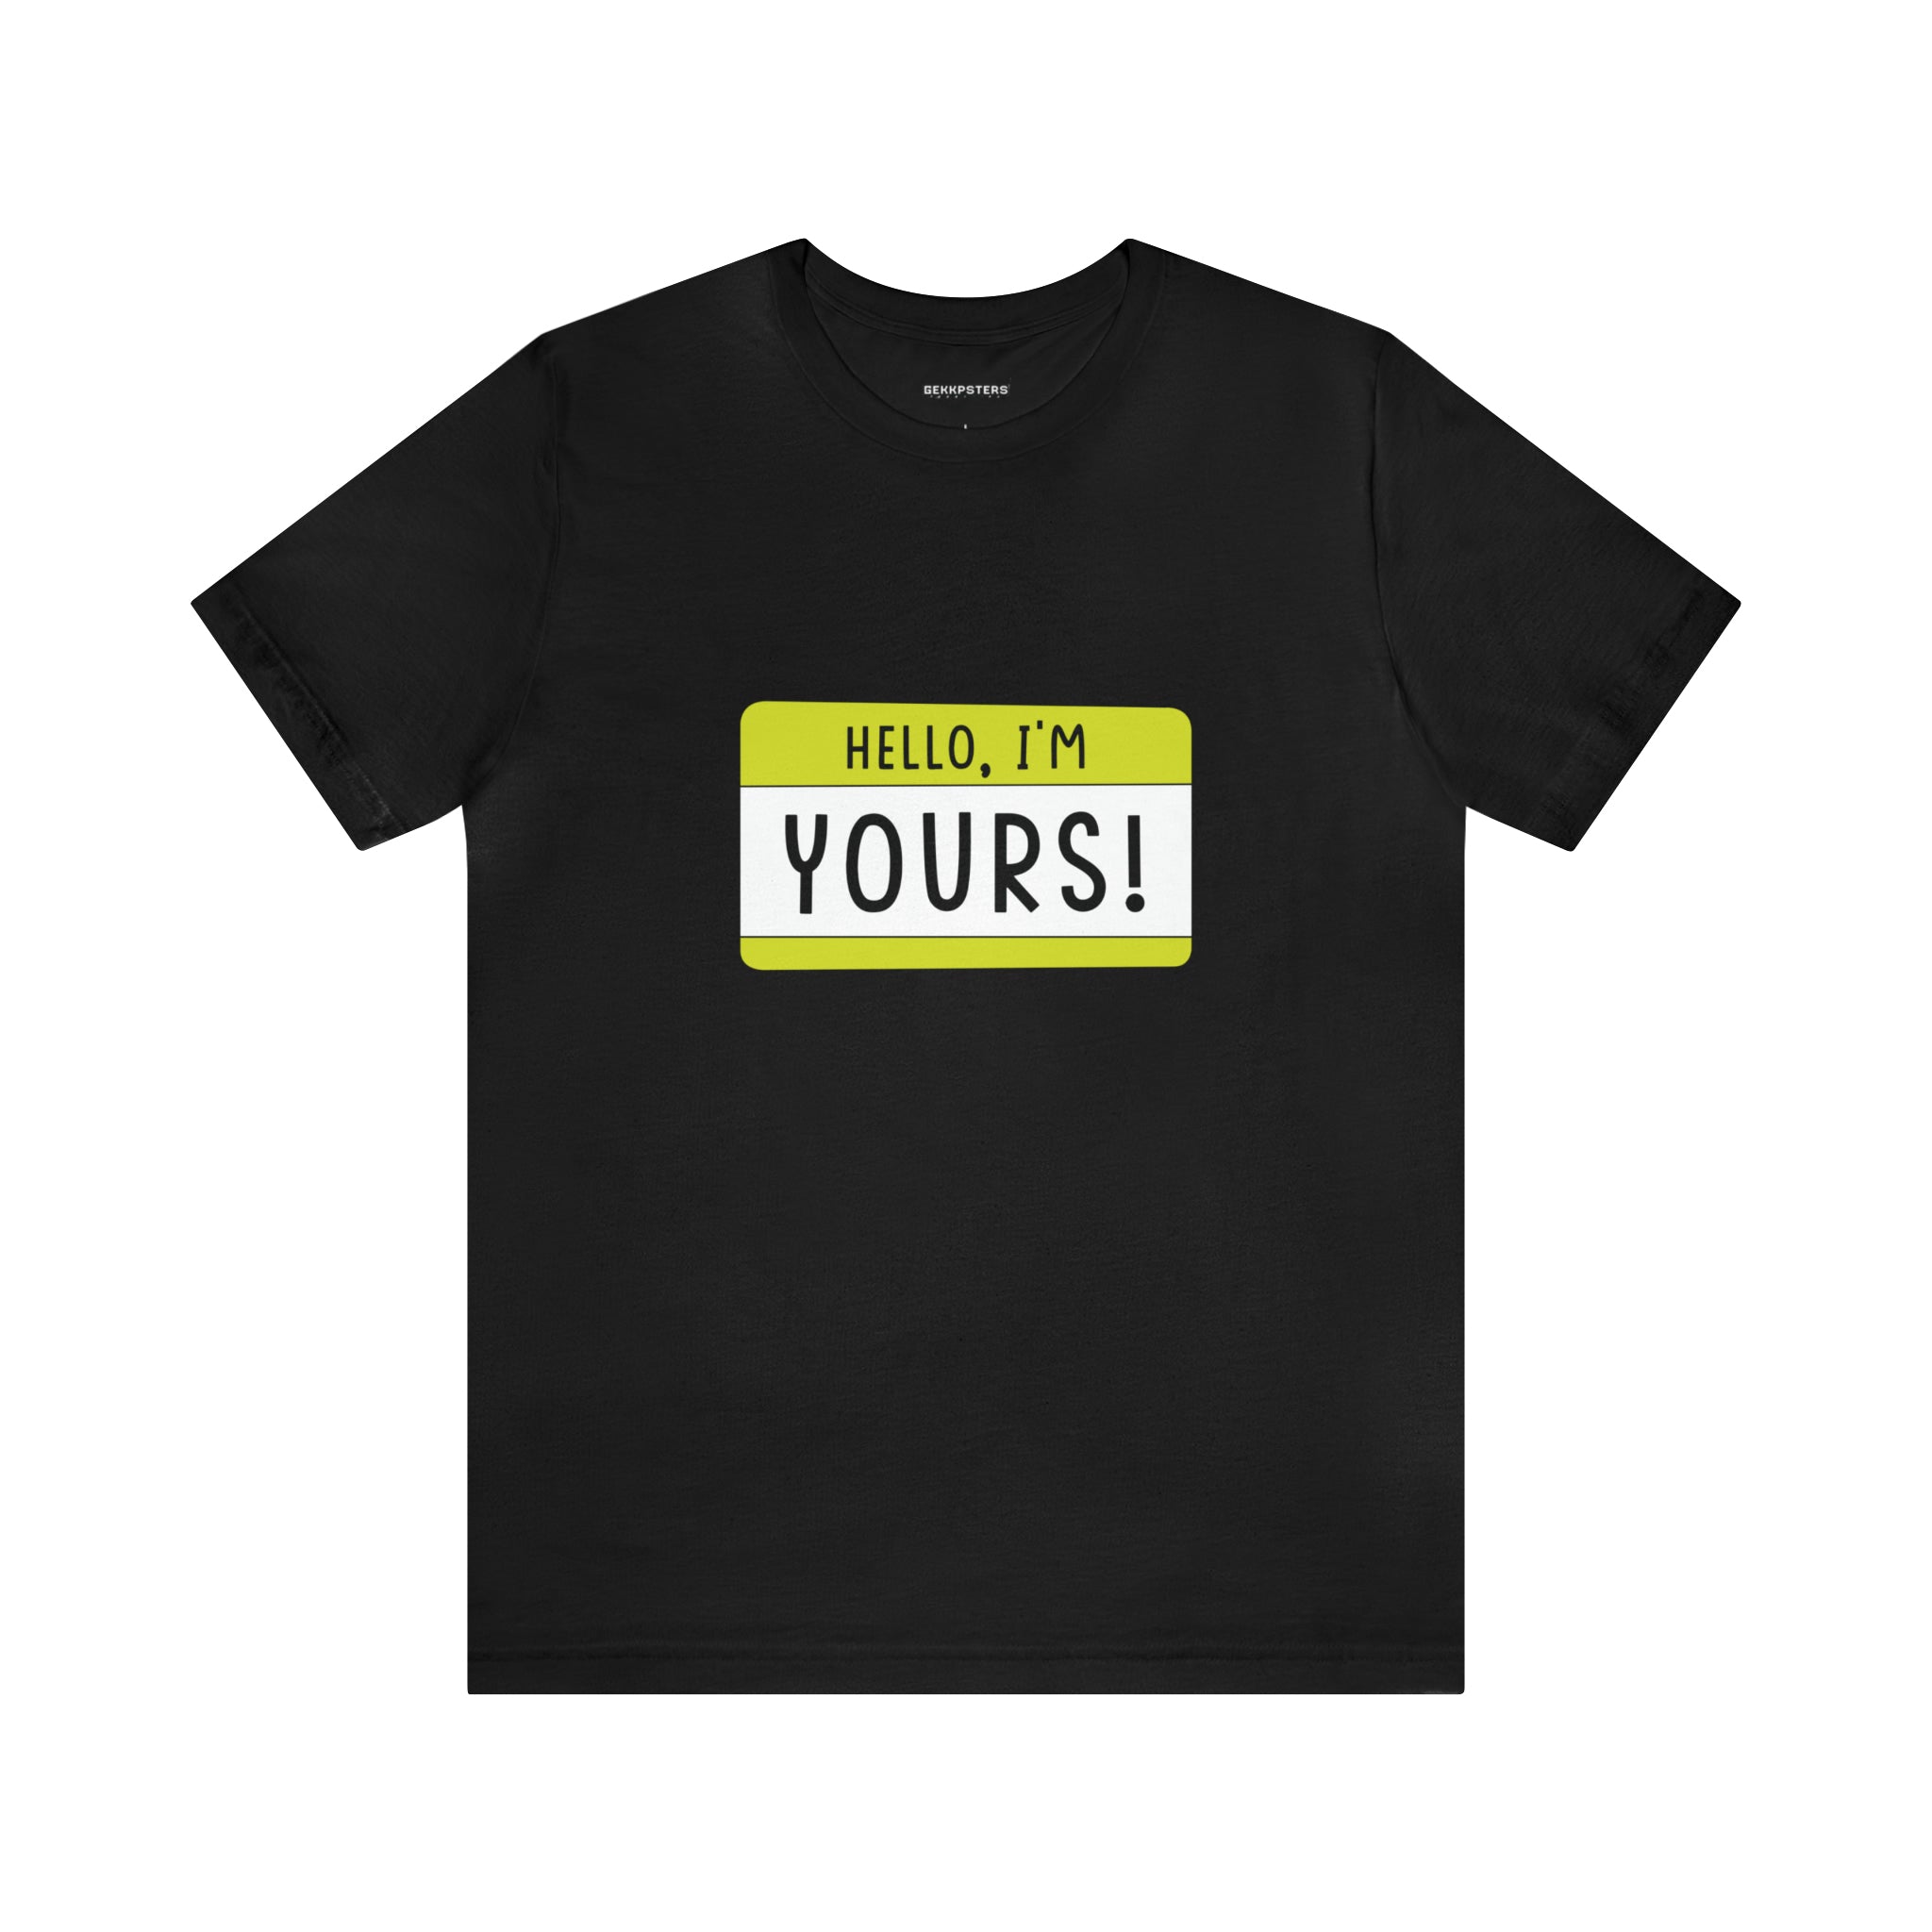 Hello, I'm YOURS T-Shirt with a yellow name tag graphic on the chest that reads "hello, I'm yours!" designed for the geeky gaming enthusiast.